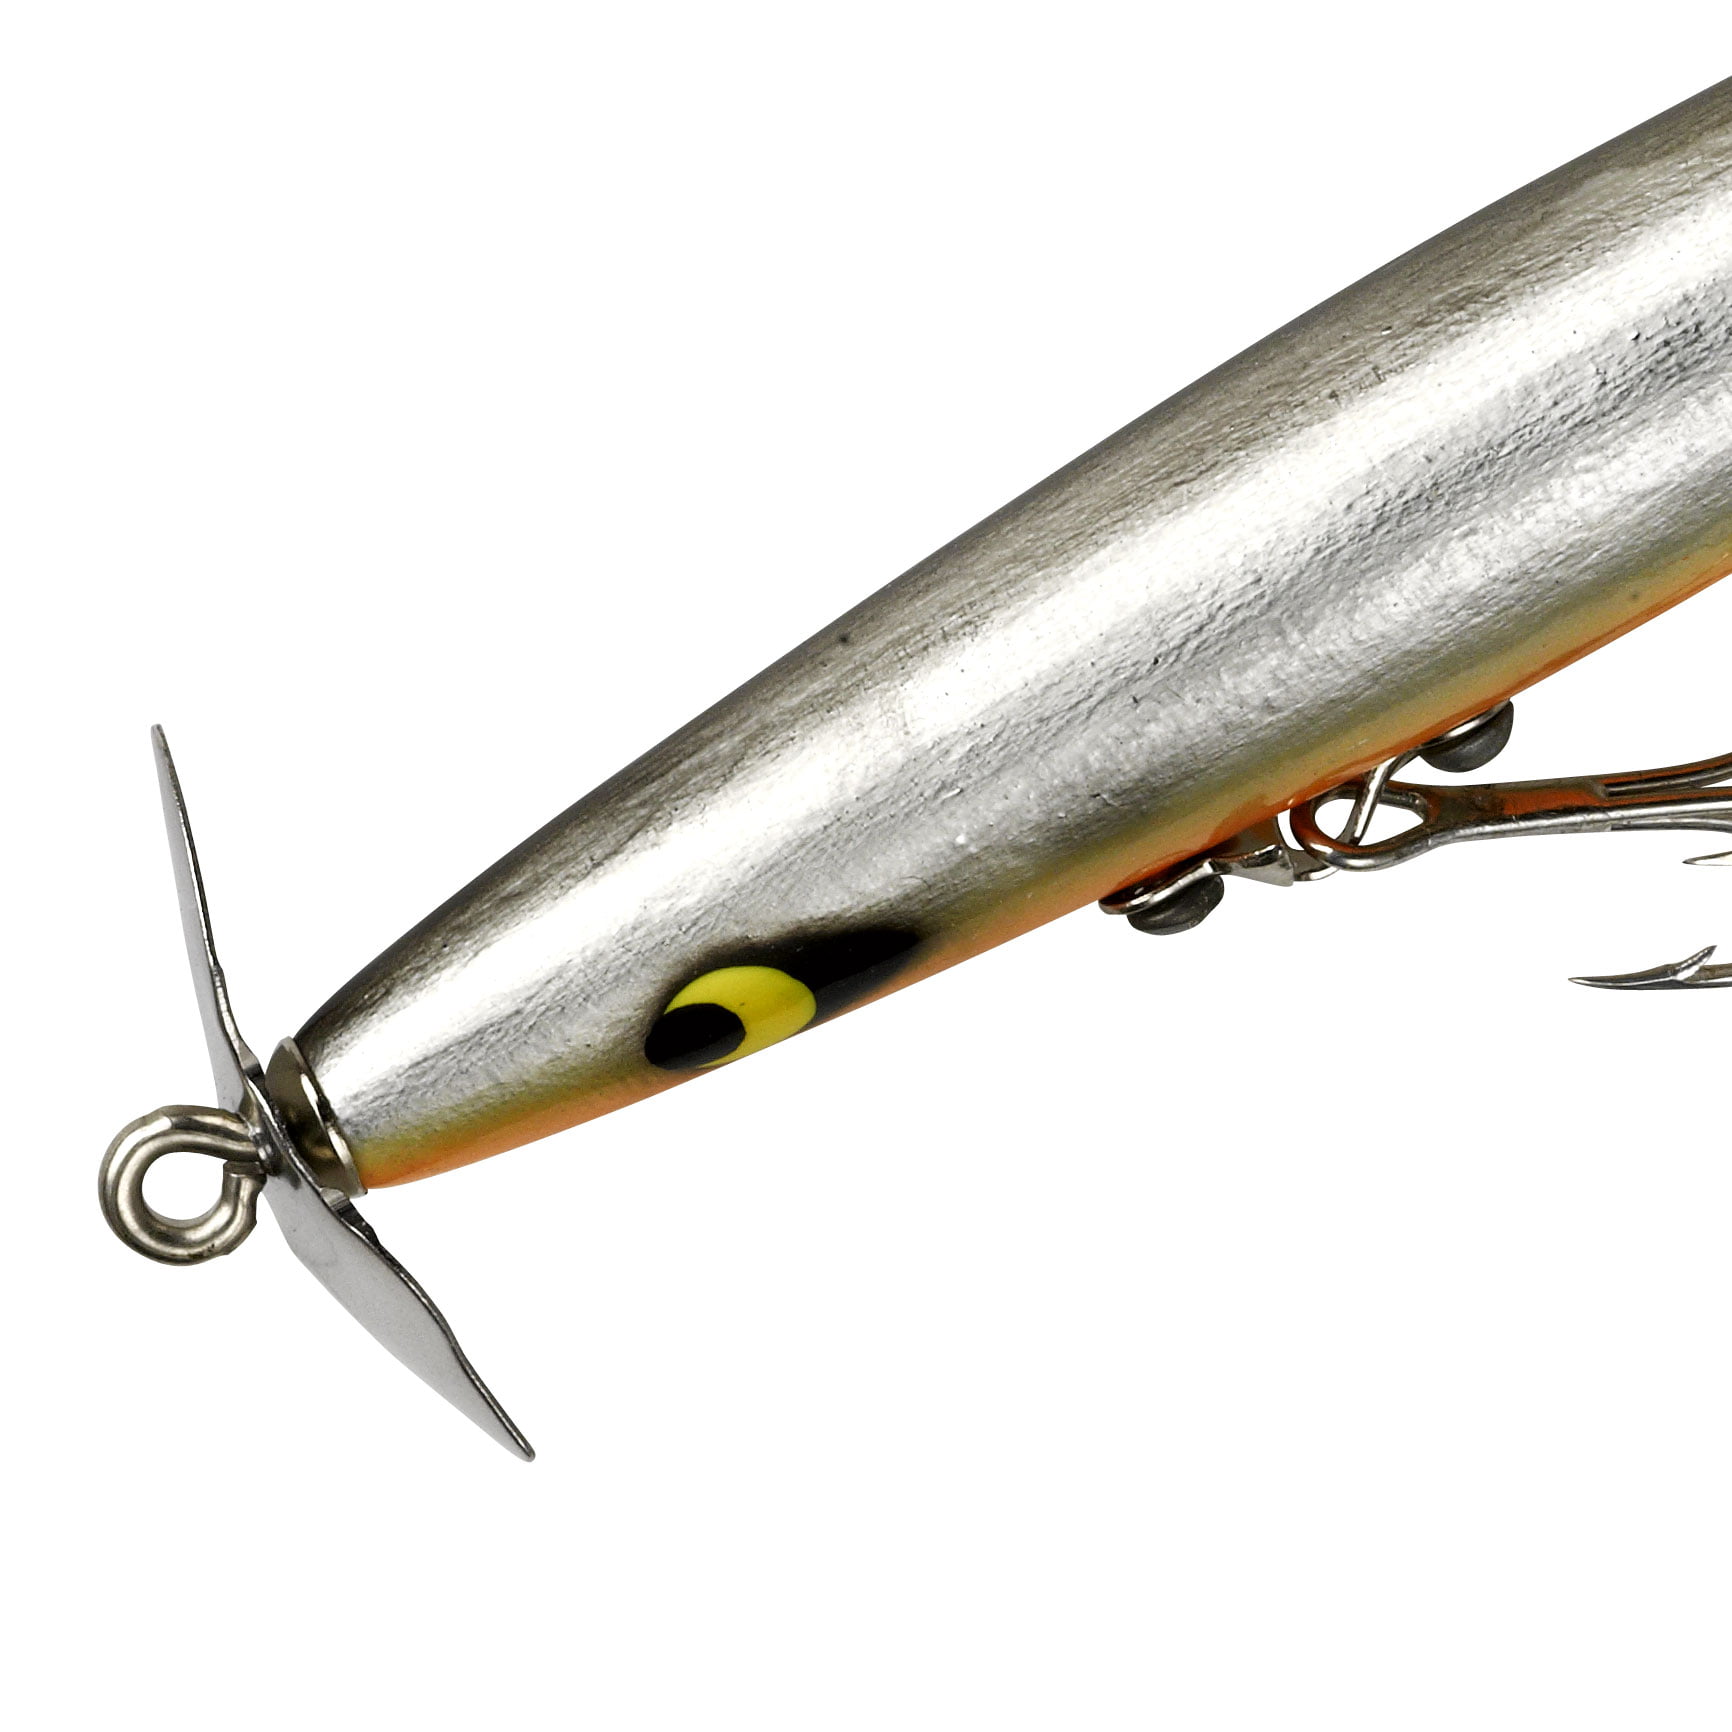 Jack K. Smithwick & Son 4 Devils Horse Floater fishing lure in box bottom  in good condition - AAA Auction and Realty